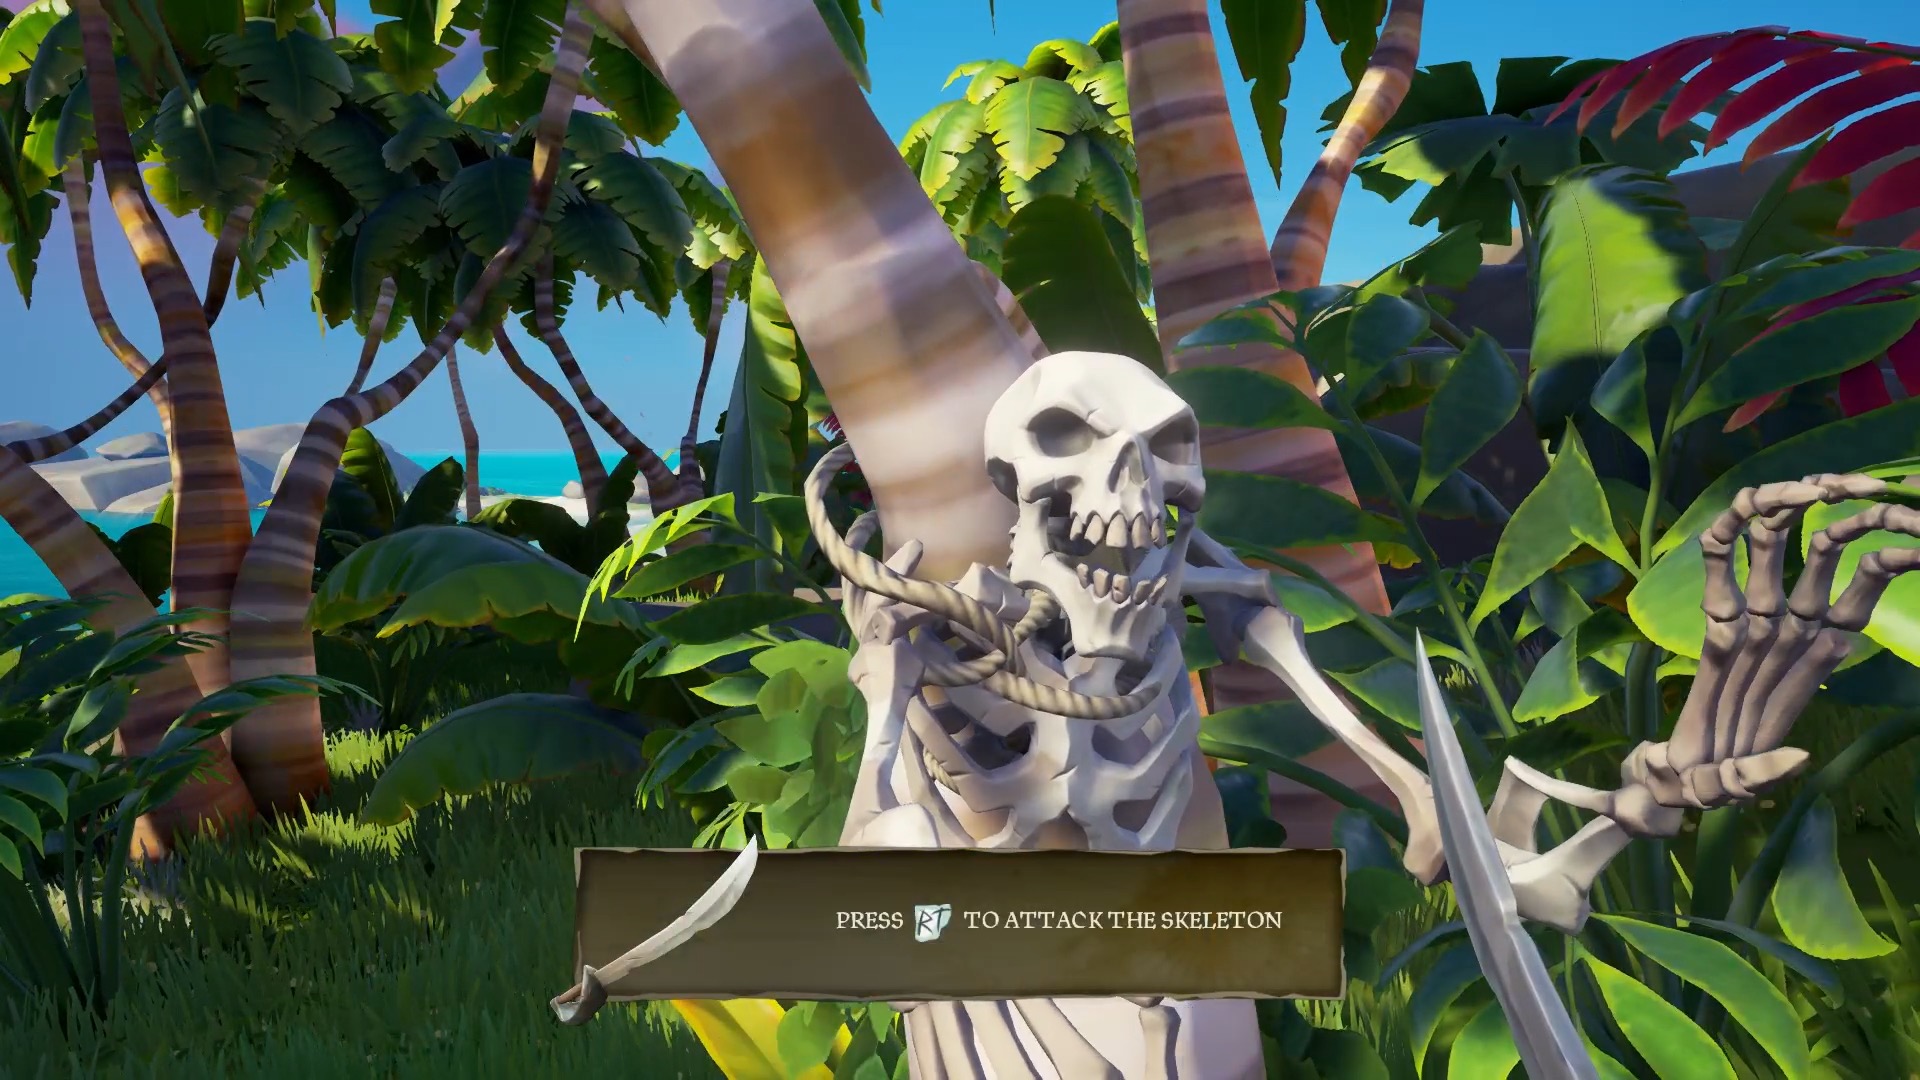 Screenshot of Sea of Thieves game showing text that reads "Press RT to attach the skeleton" with RT resembling a button on game controller.  A white skeleton also appears behind the text and it is tied to a tree trunk in a beach like setting.